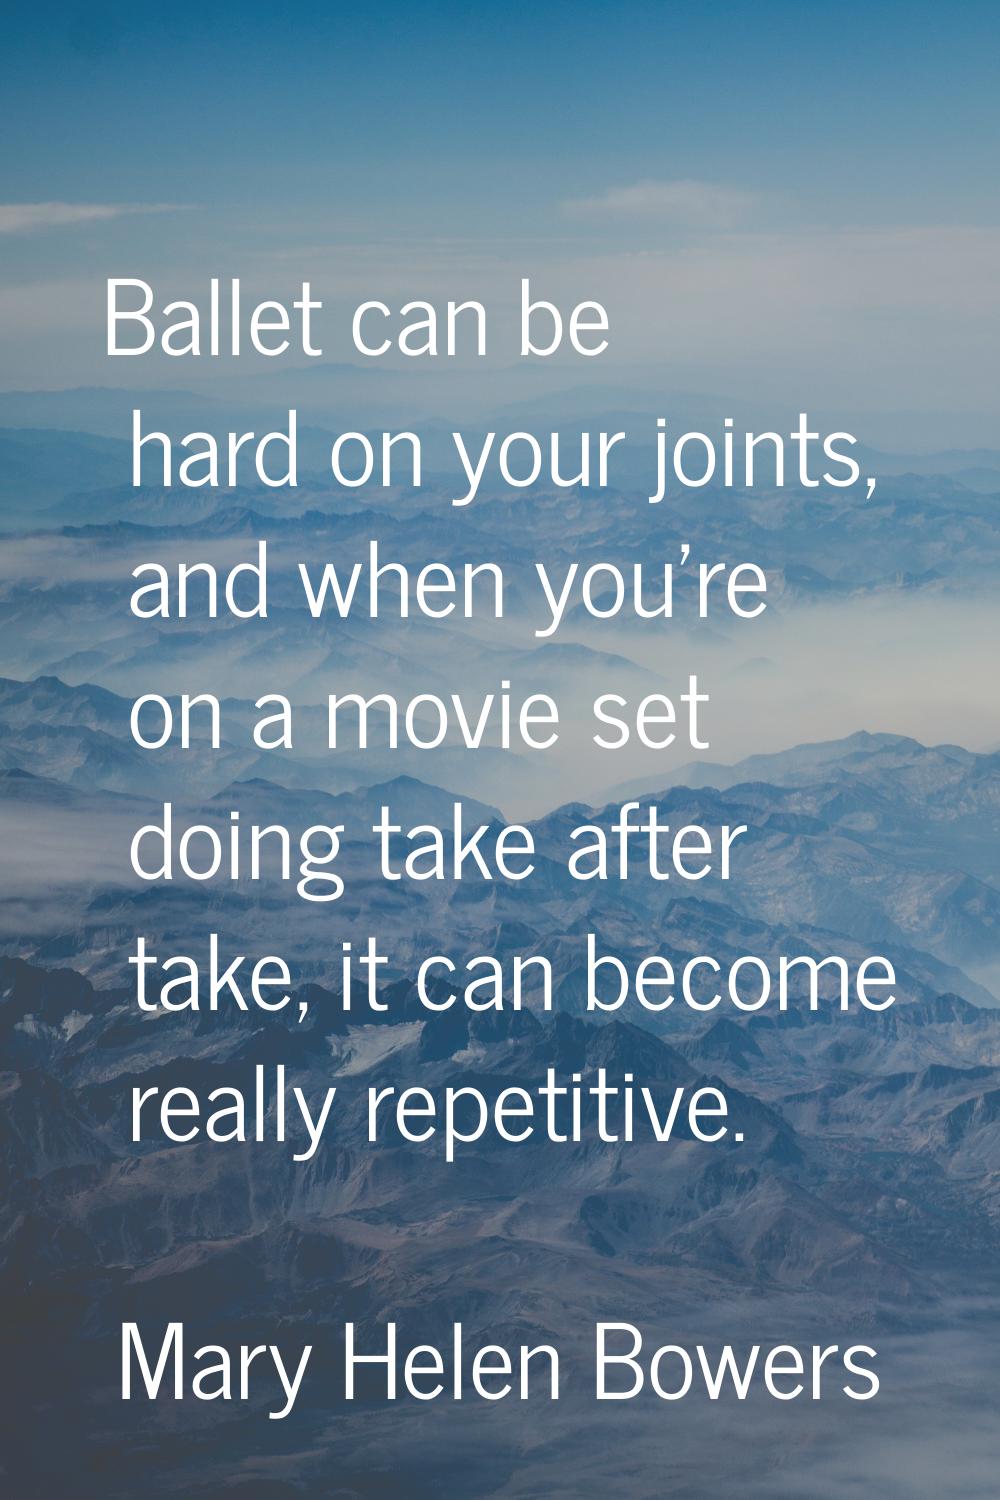 Ballet can be hard on your joints, and when you're on a movie set doing take after take, it can bec